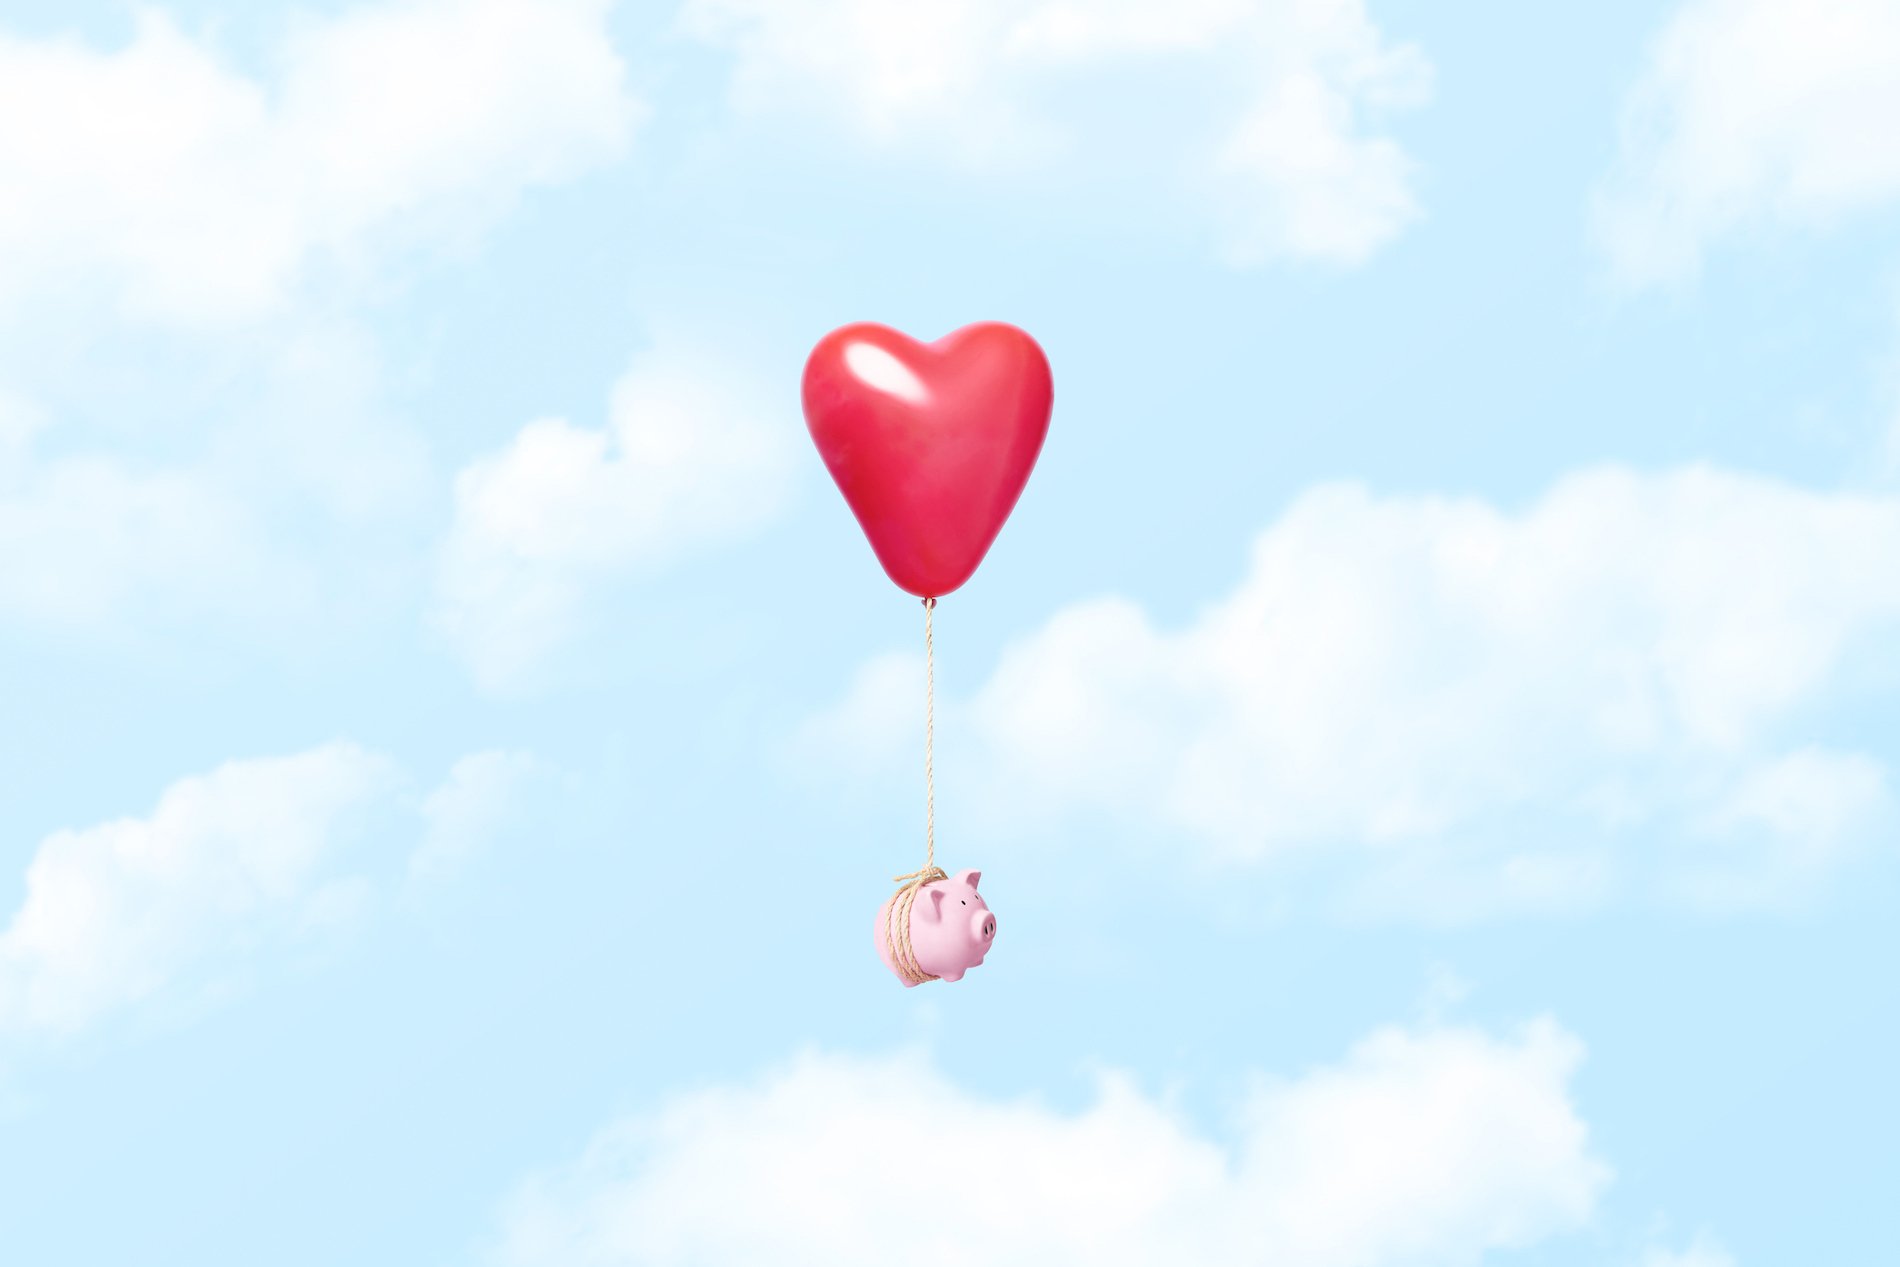 Piggy bank tied to a red heart ballon in clouds